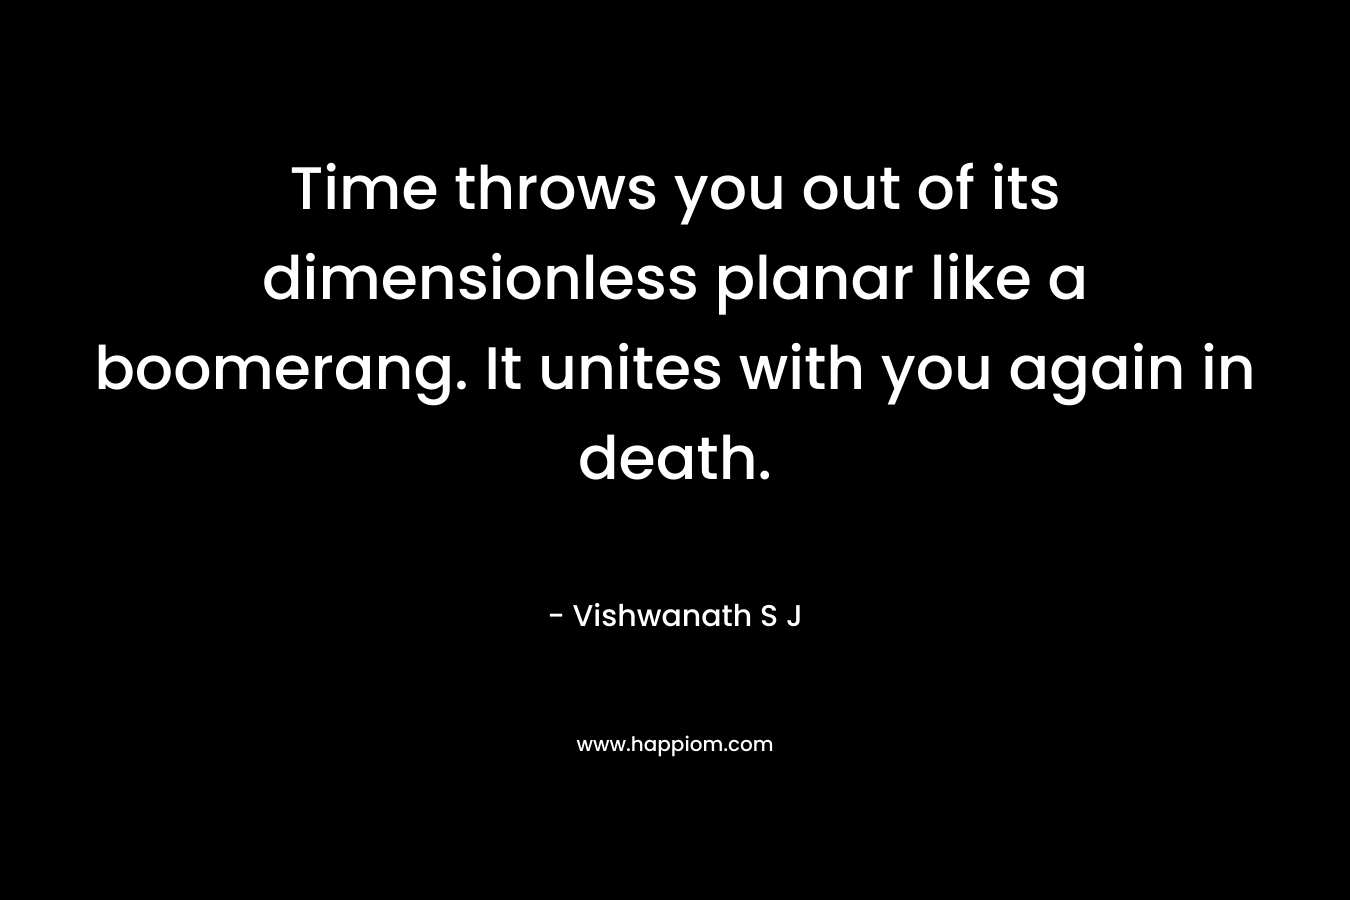 Time throws you out of its dimensionless planar like a boomerang. It unites with you again in death. – Vishwanath S J